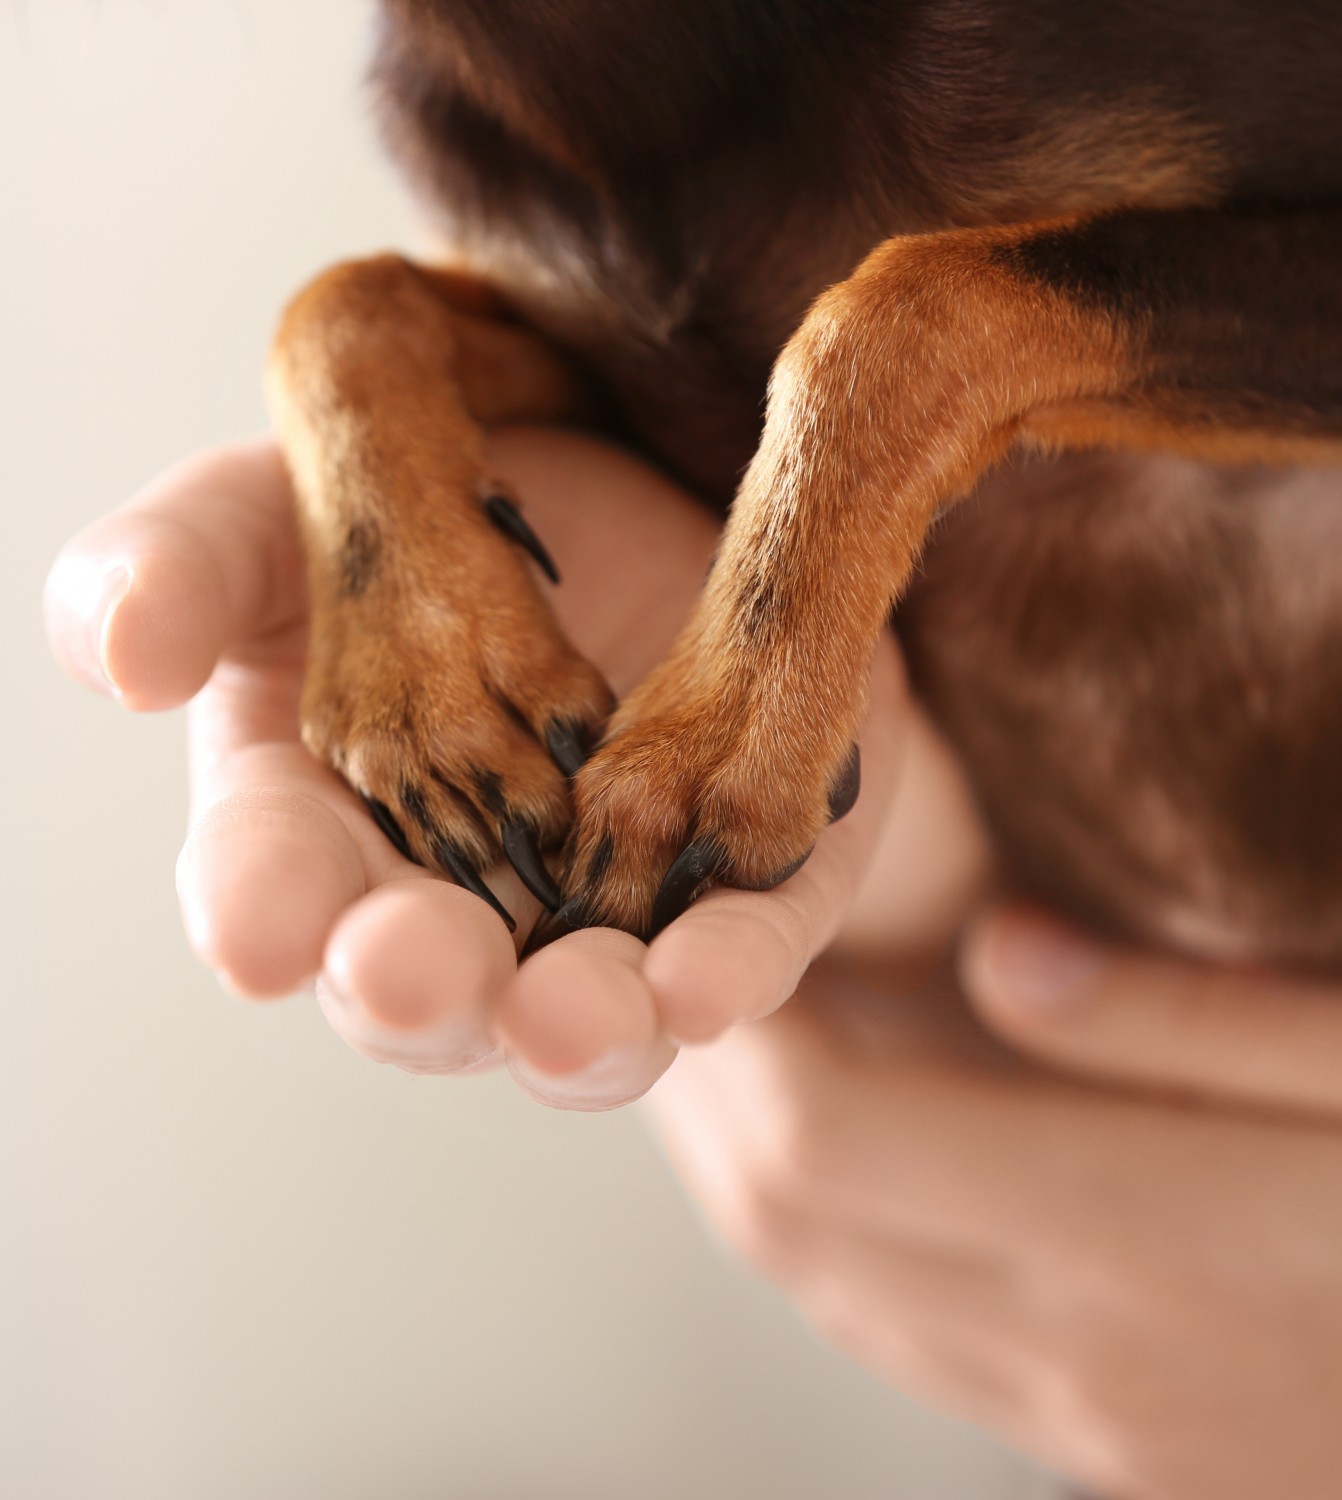 Owner Holding Dachshund's Paws